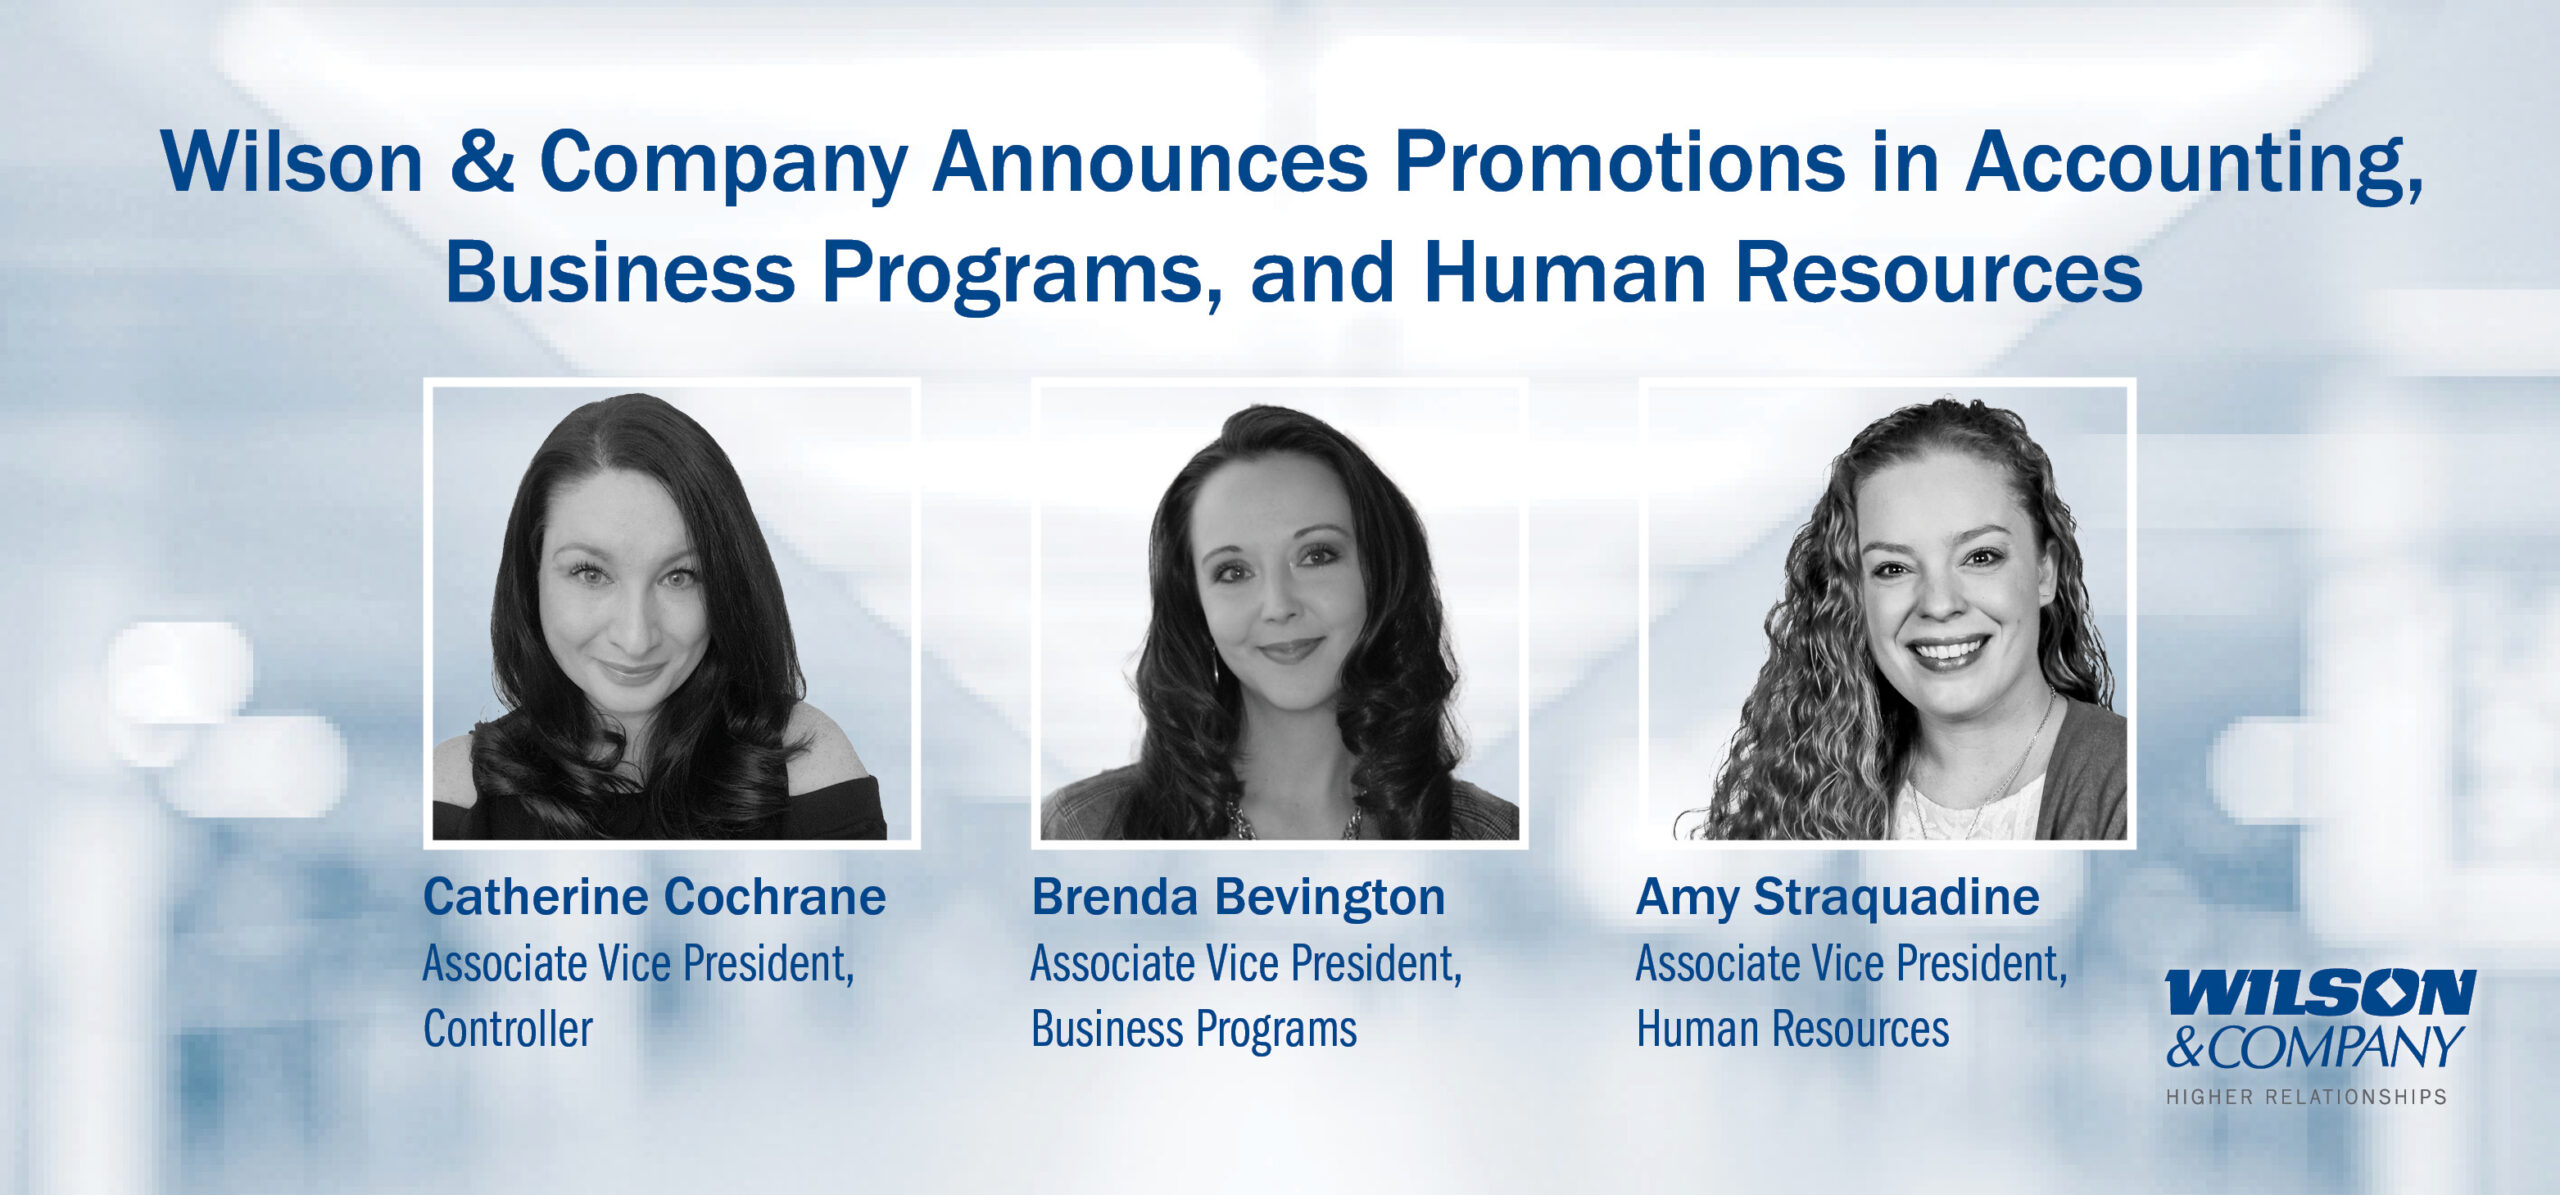 Wilson & Company Announces Promotions in Accounting, Business Programs, and Human Resources